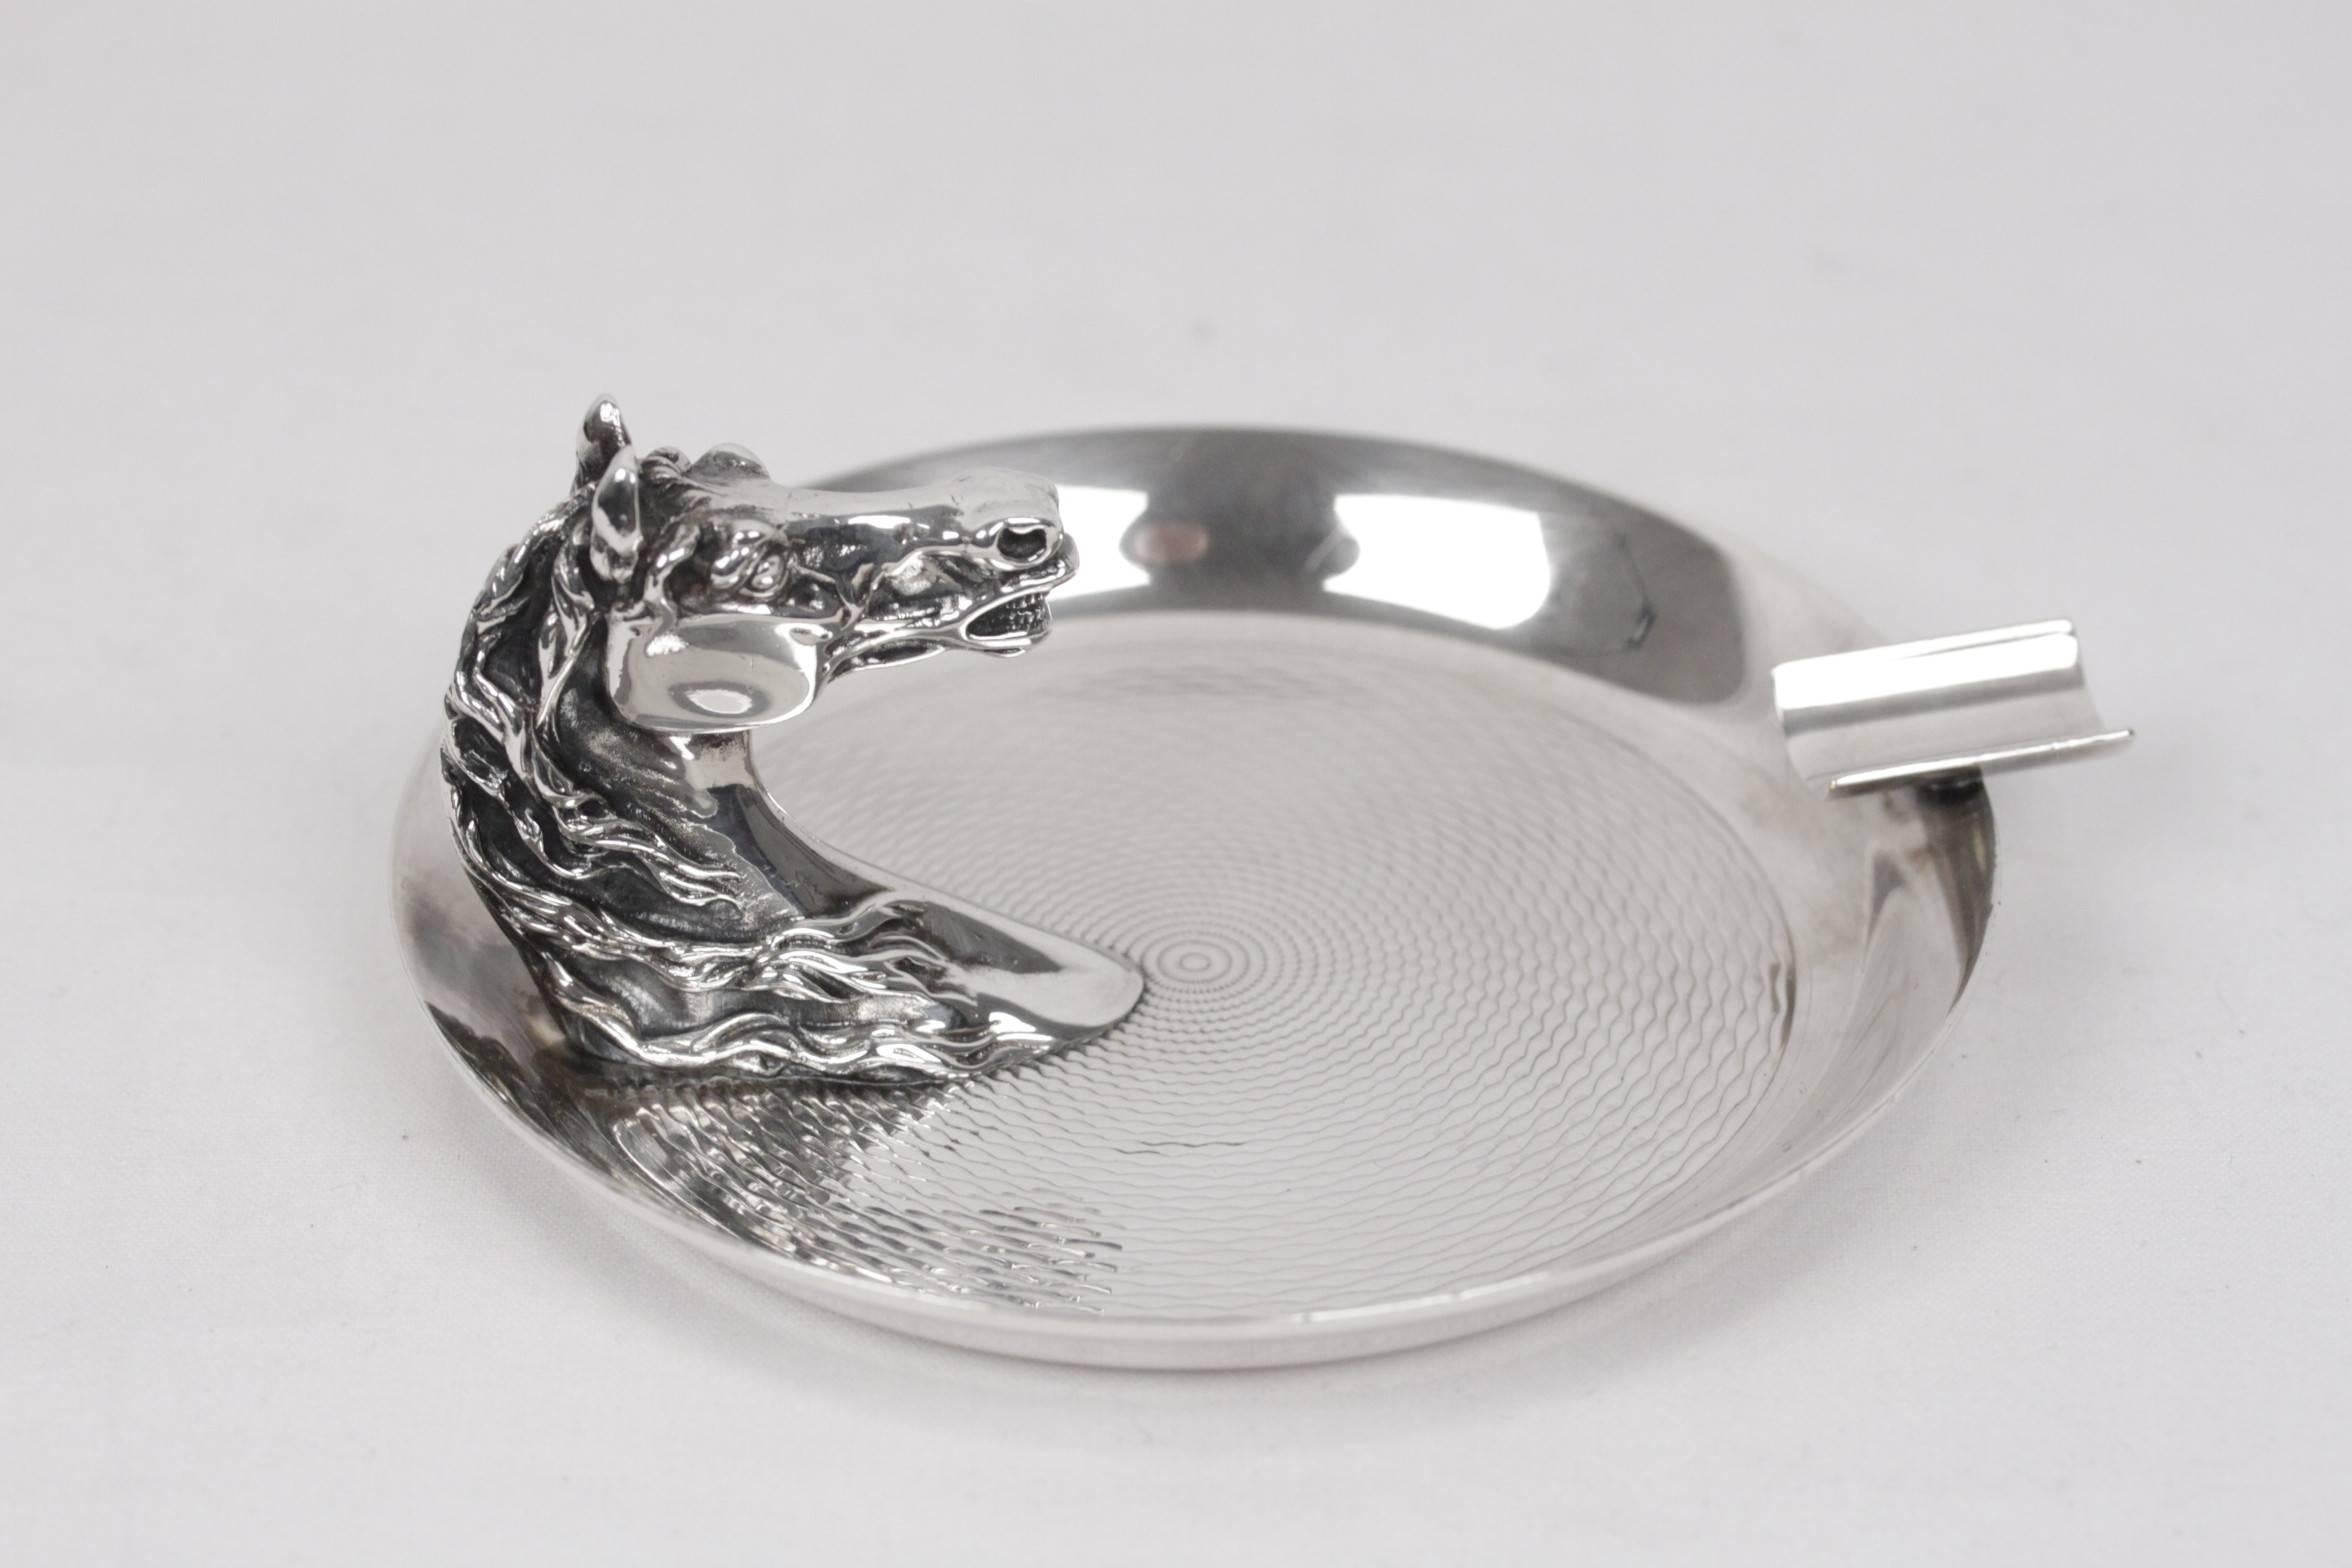  - Hermes Equestrian silver plated Ashtray
- 3D horse Head detailing (2 inches - 5,1 cm tall)
- Made in France
- Engine turned base
- Diameter: 4 3/4 inches - 12 cm

Logo & Brand: 'HERMES Paris' signature on the border

Condition (please